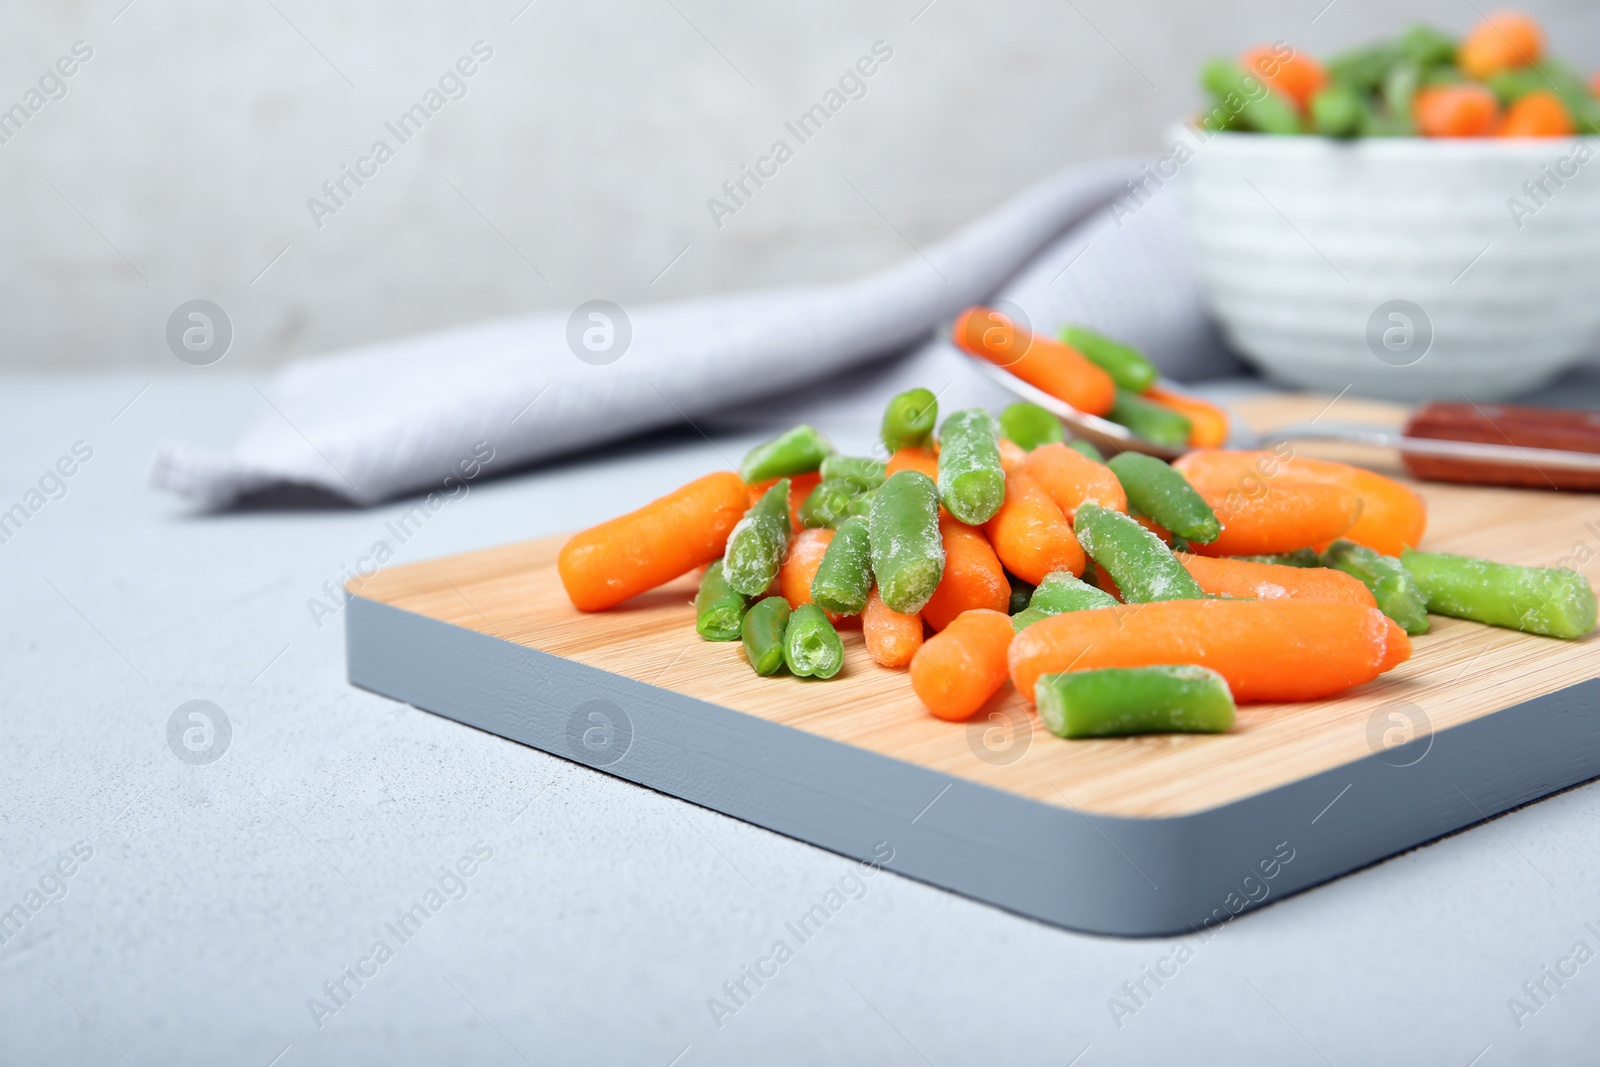 Photo of Wooden board with frozen vegetables on table